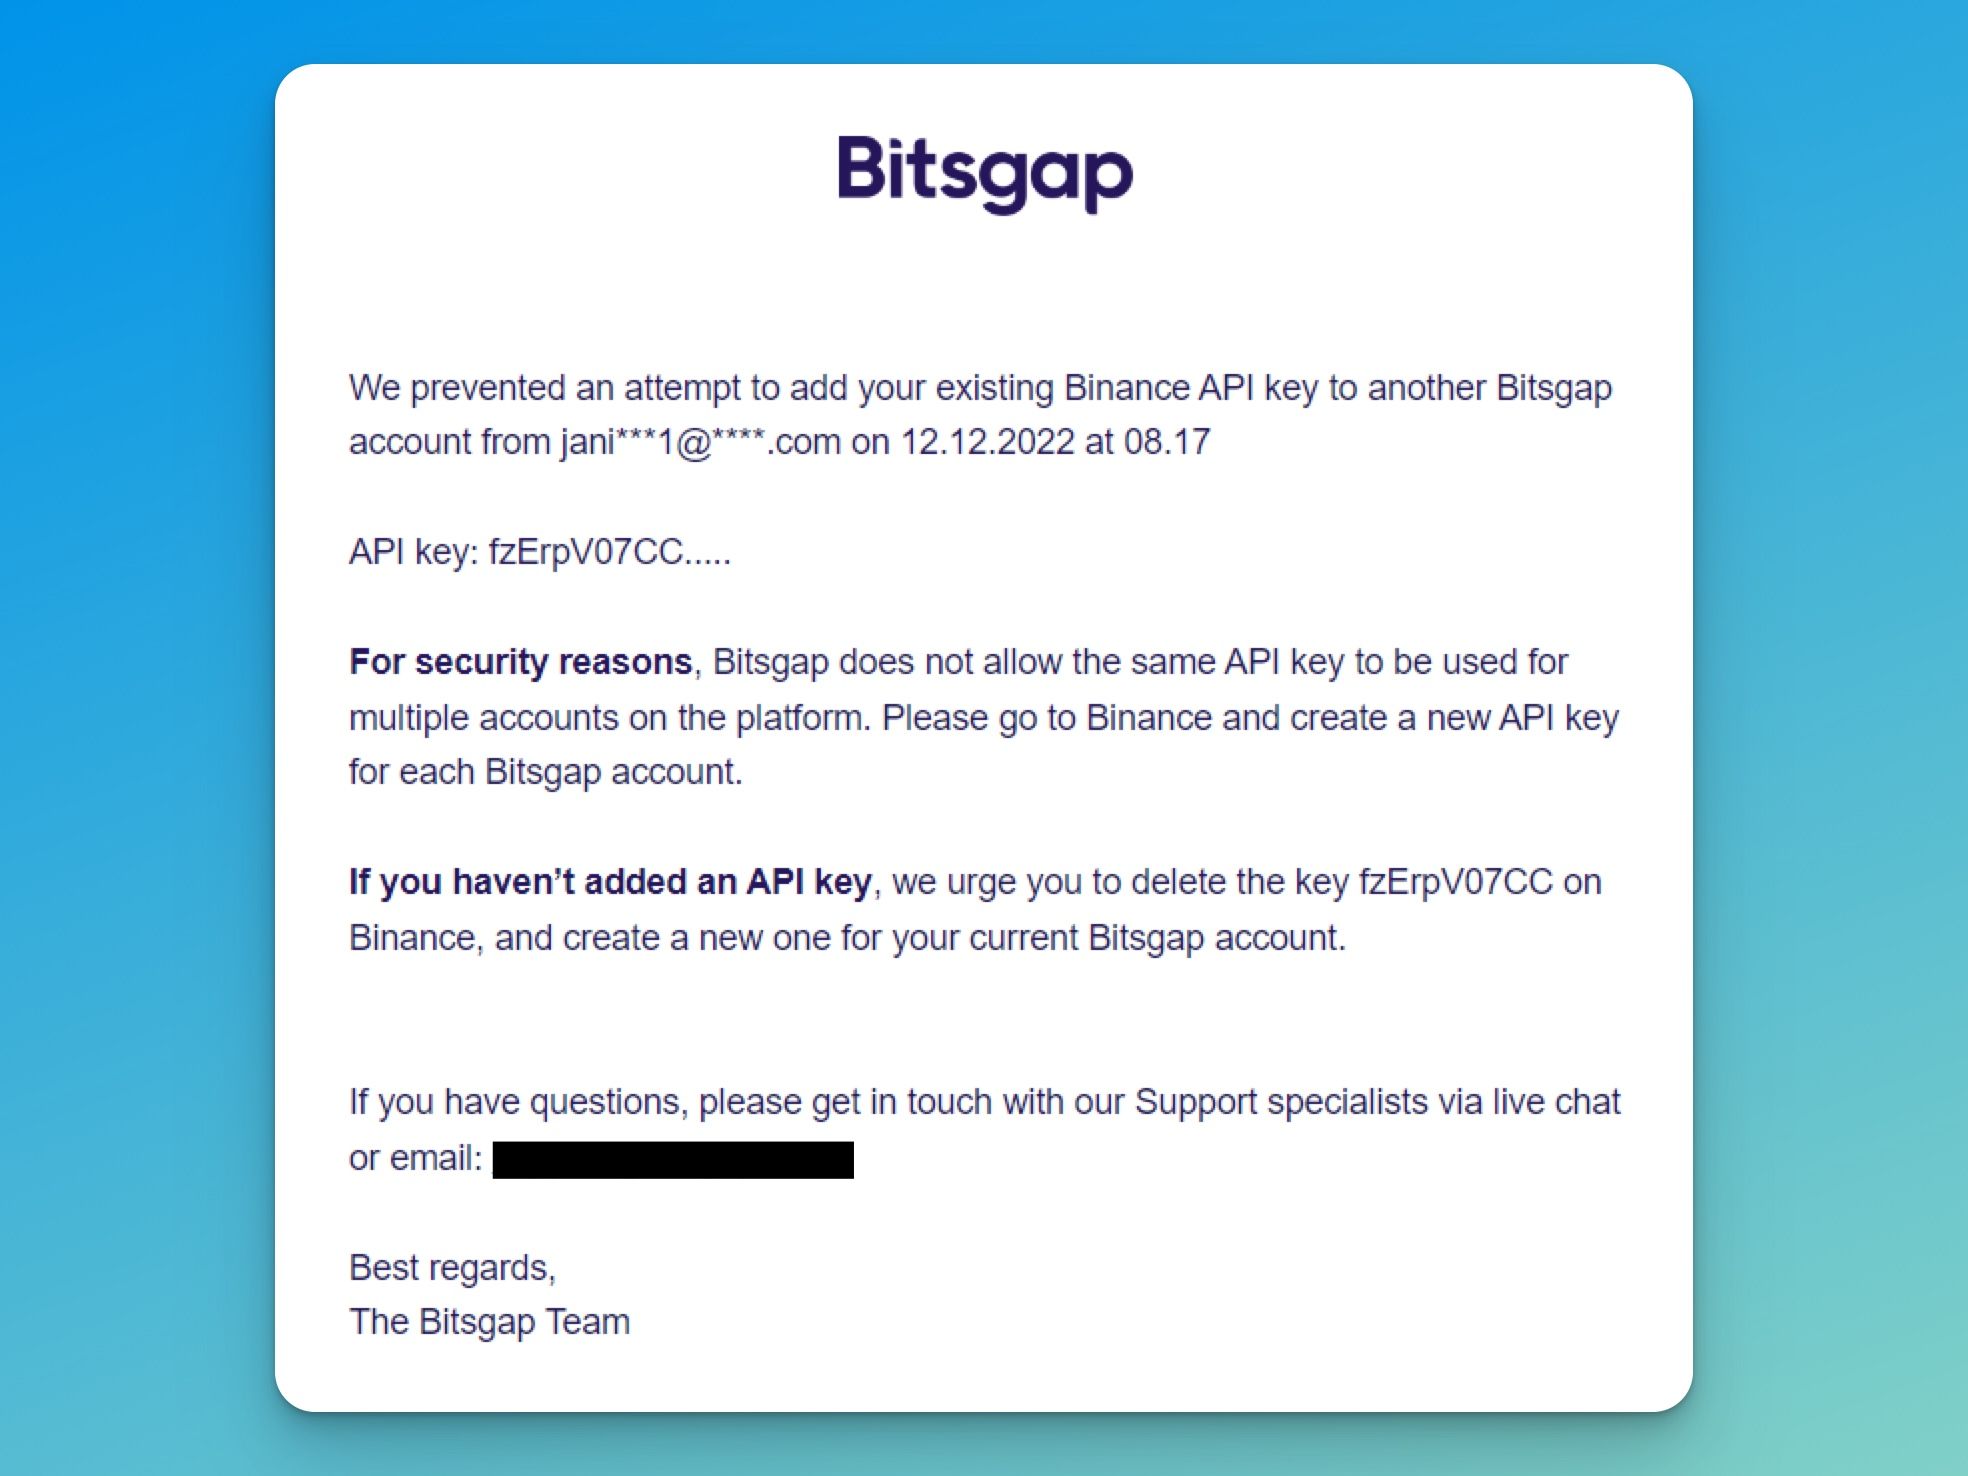 Pic. 2. An email from Bitsgap informing a user about an attempt to add an existing API key to another Bitsgap account.